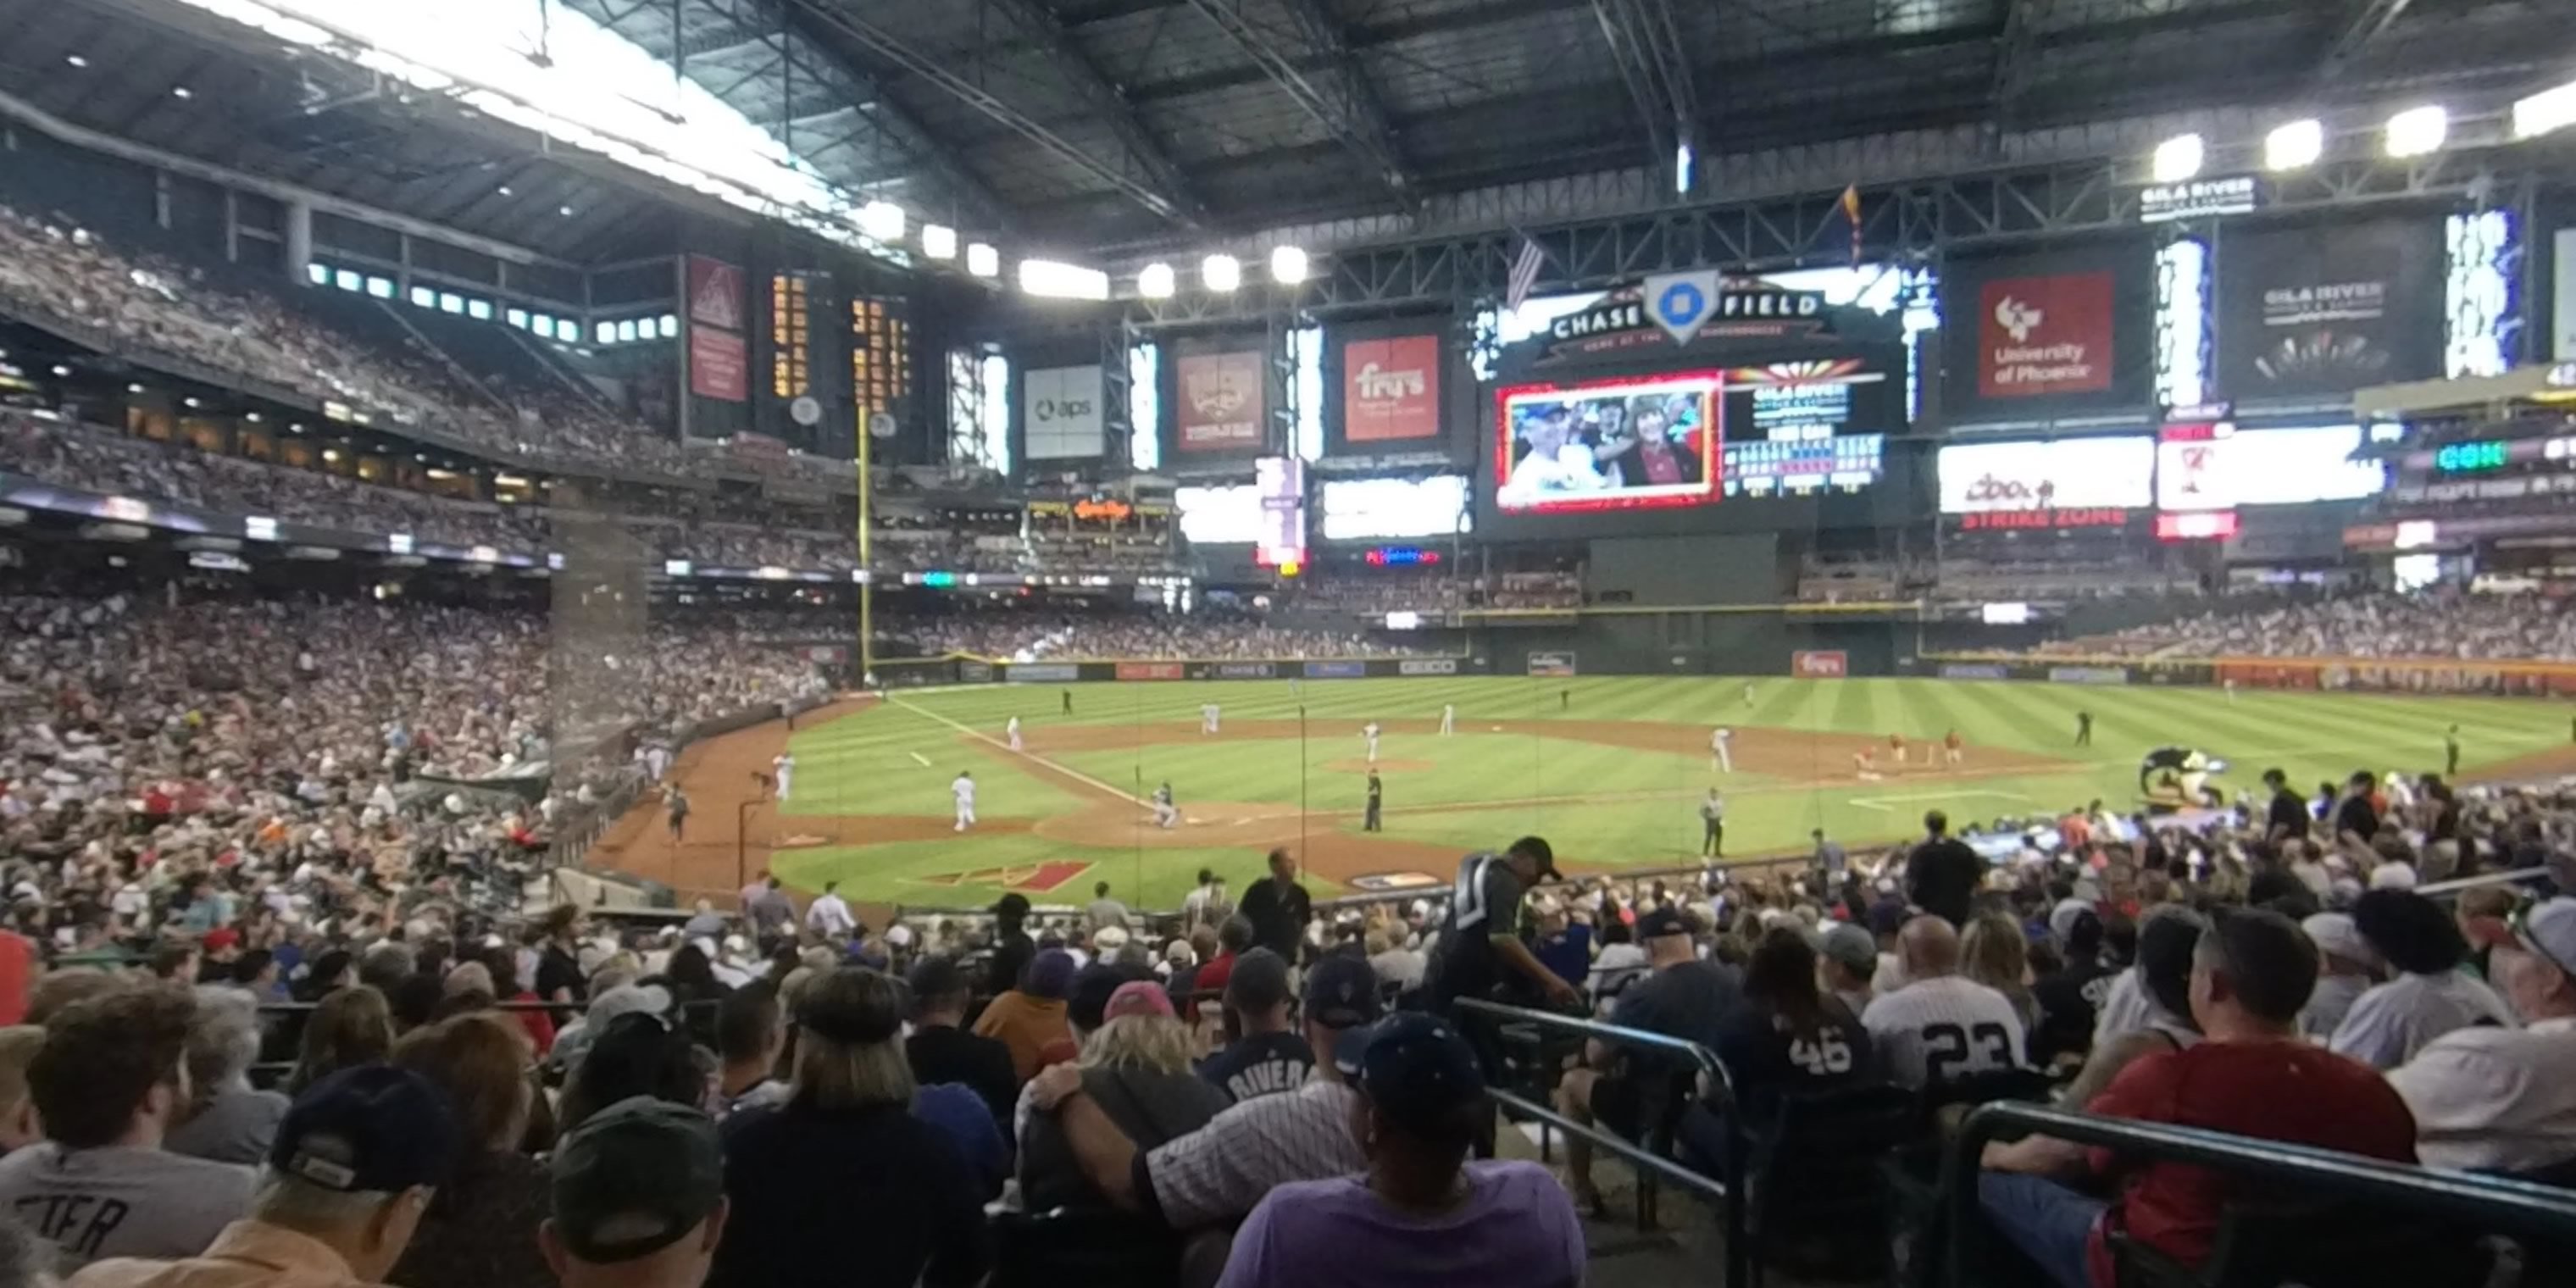 section 119 panoramic seat view  for baseball - chase field